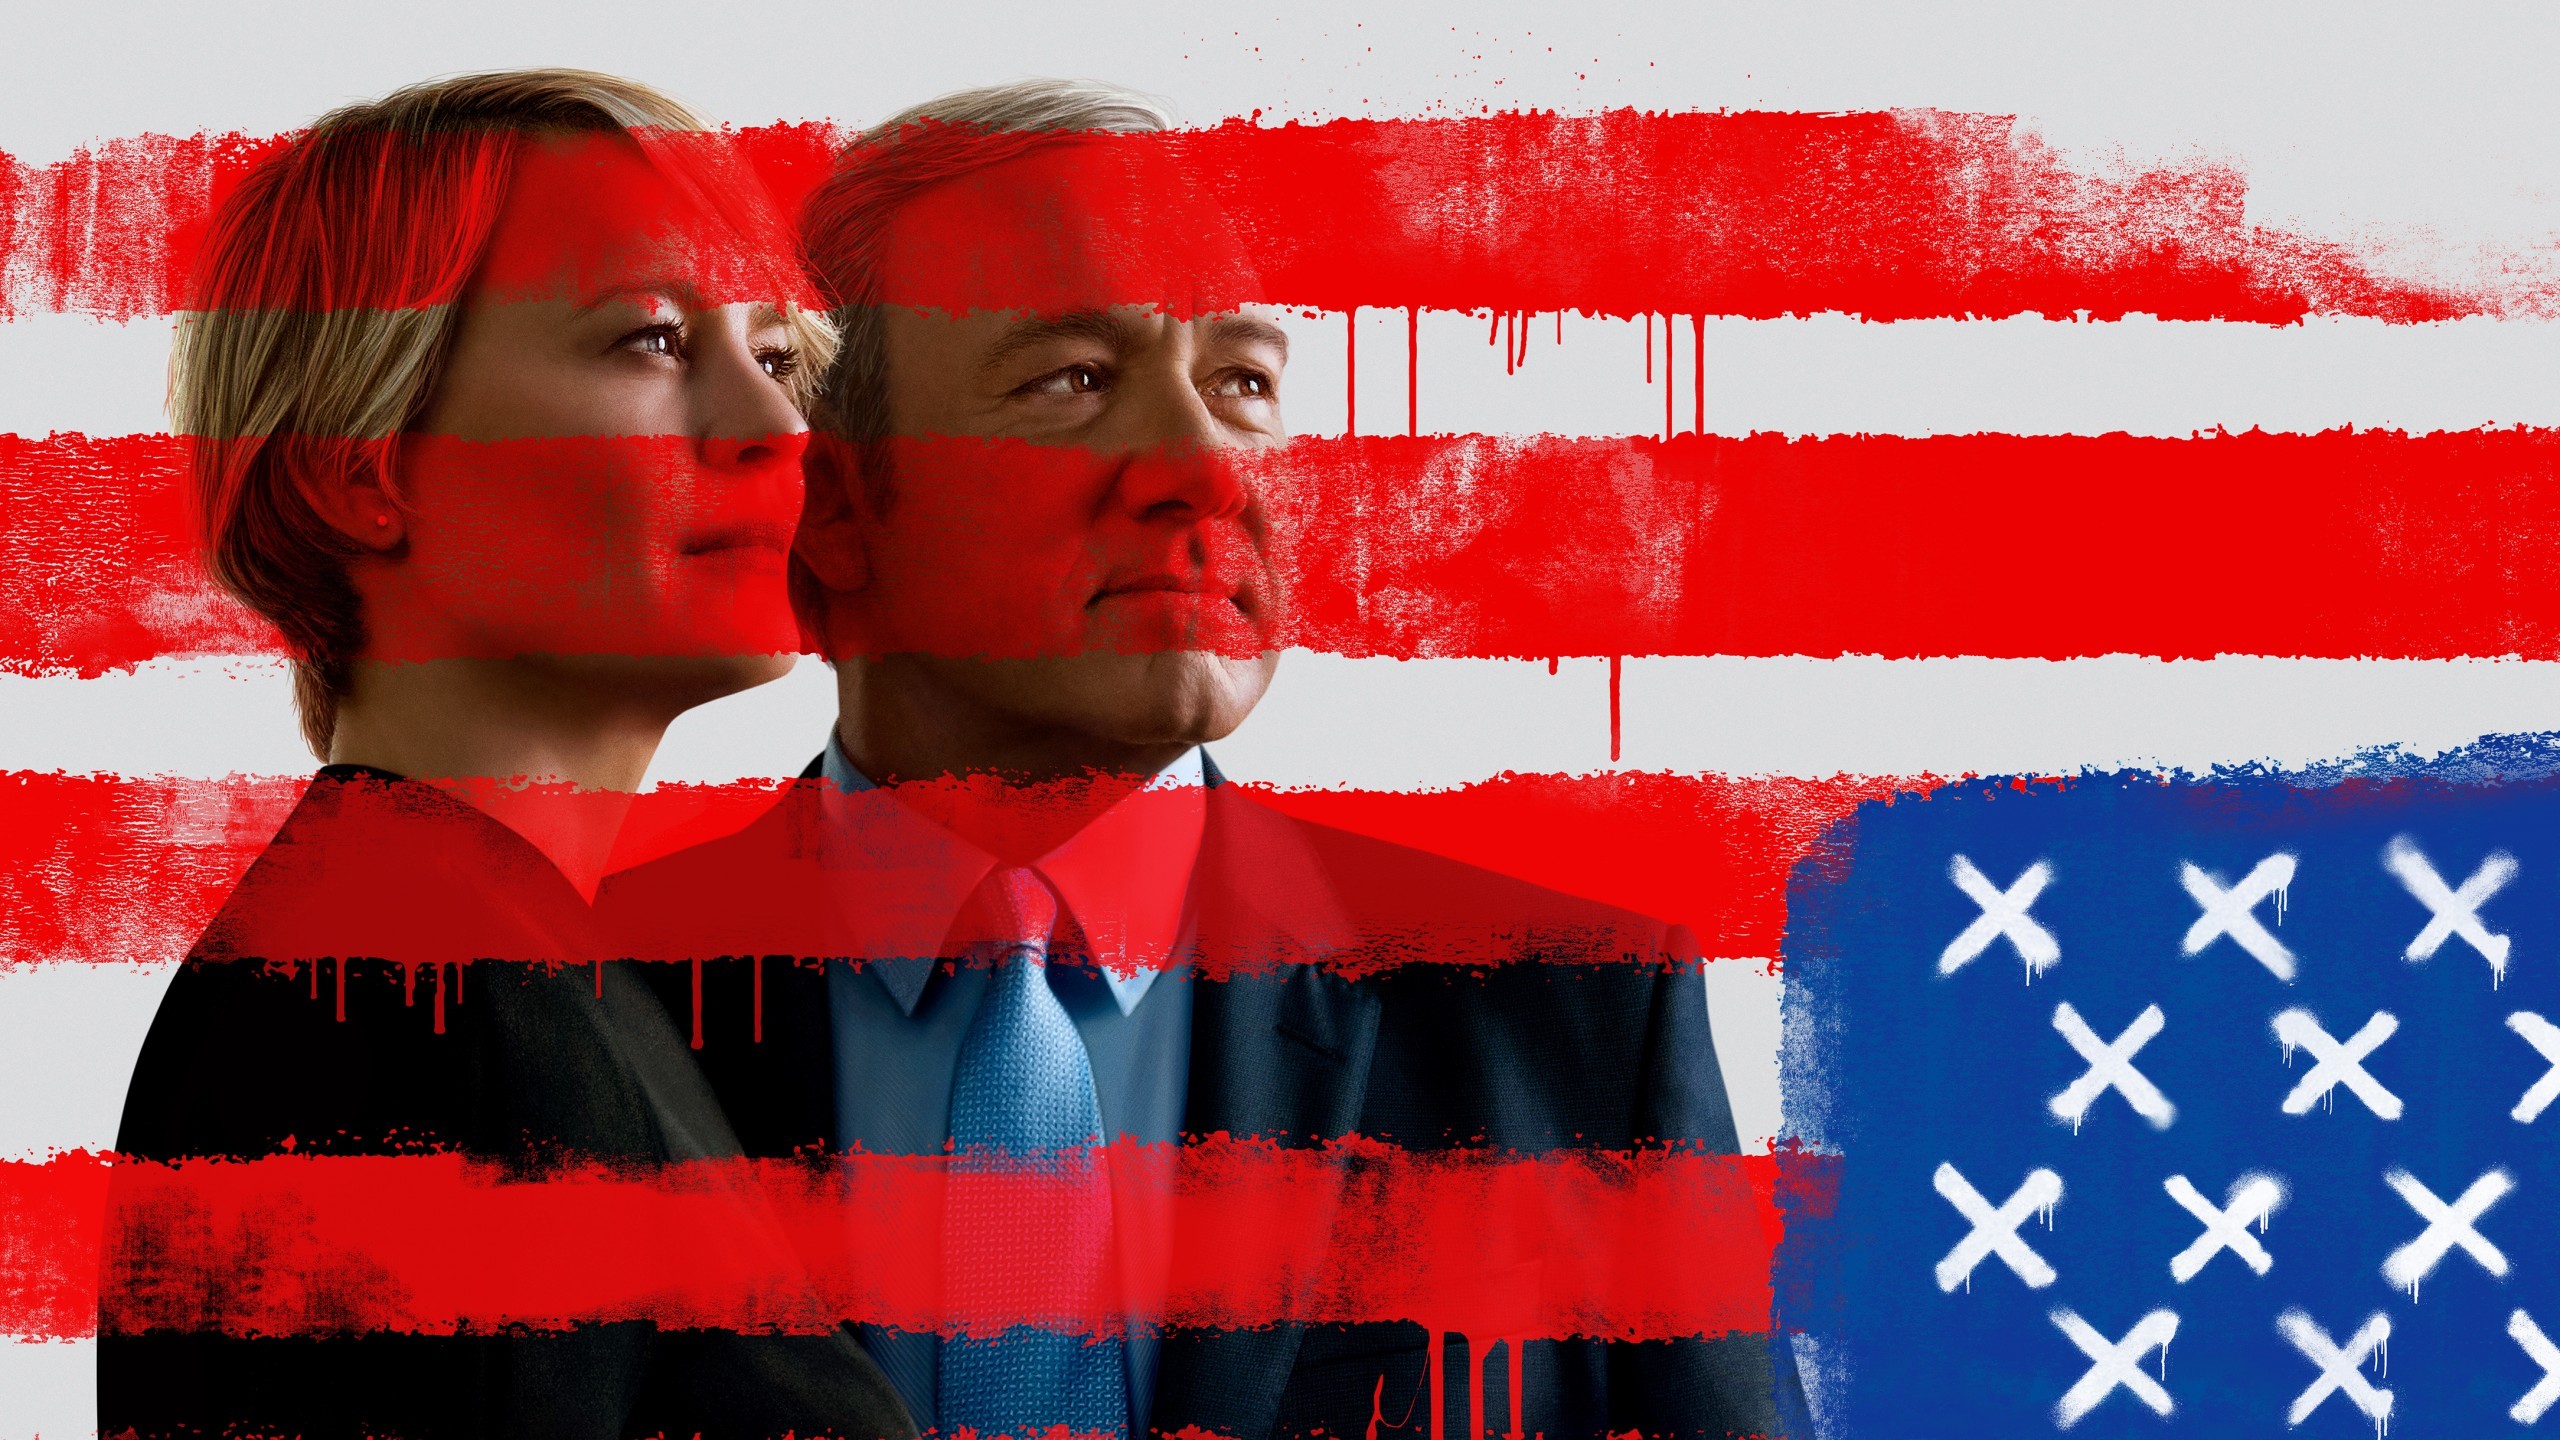 2560x1440 TV Series / House of Cards Wallpaper